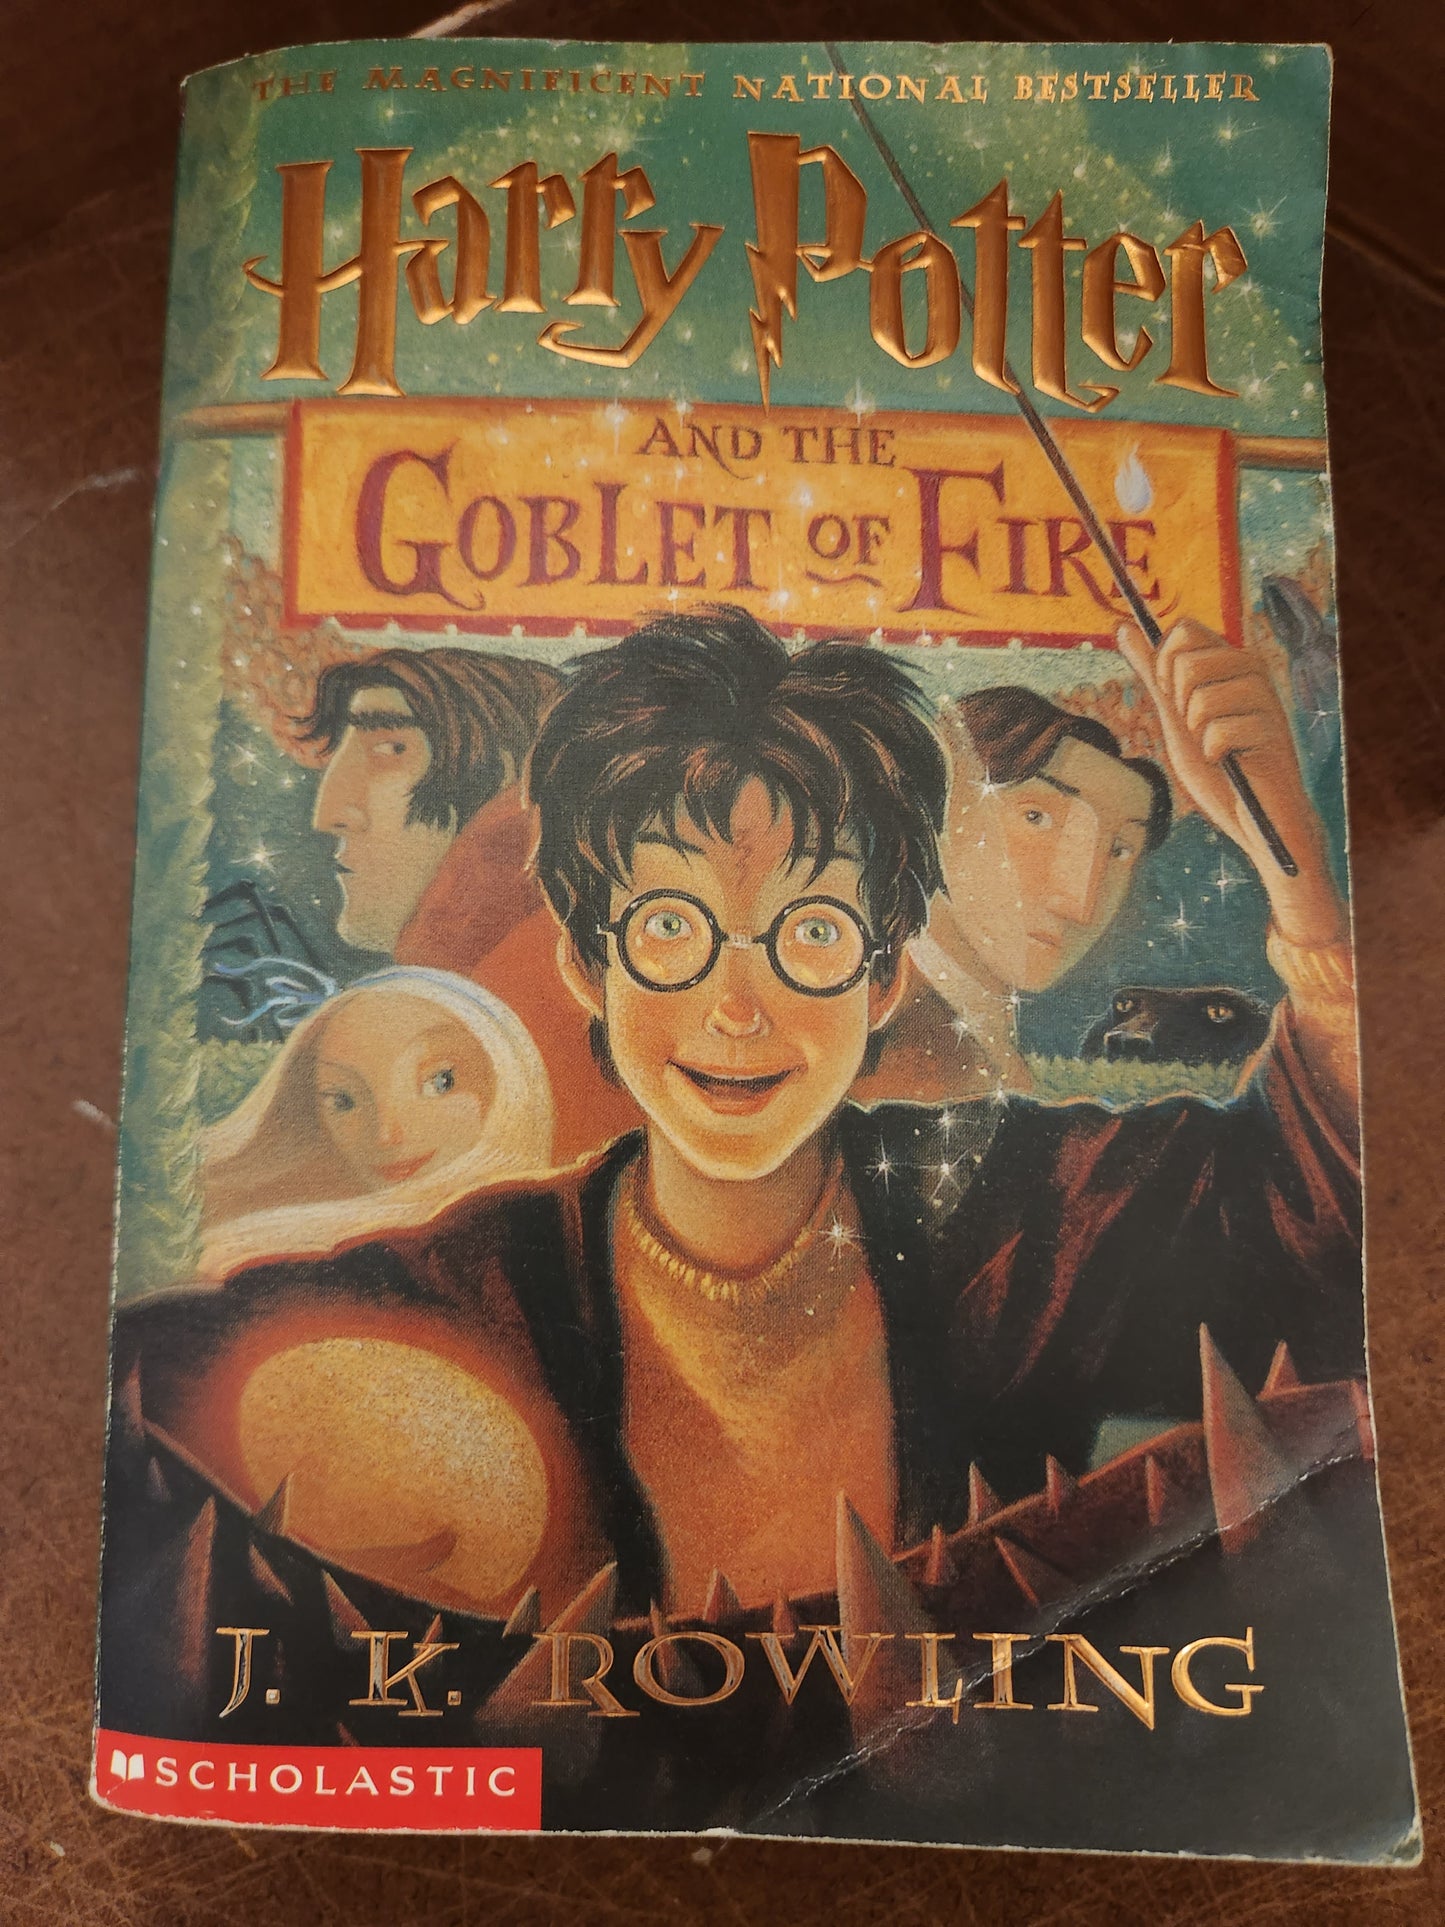 "Harry Potter and the Goblet of Fire" by J. K. Rowling